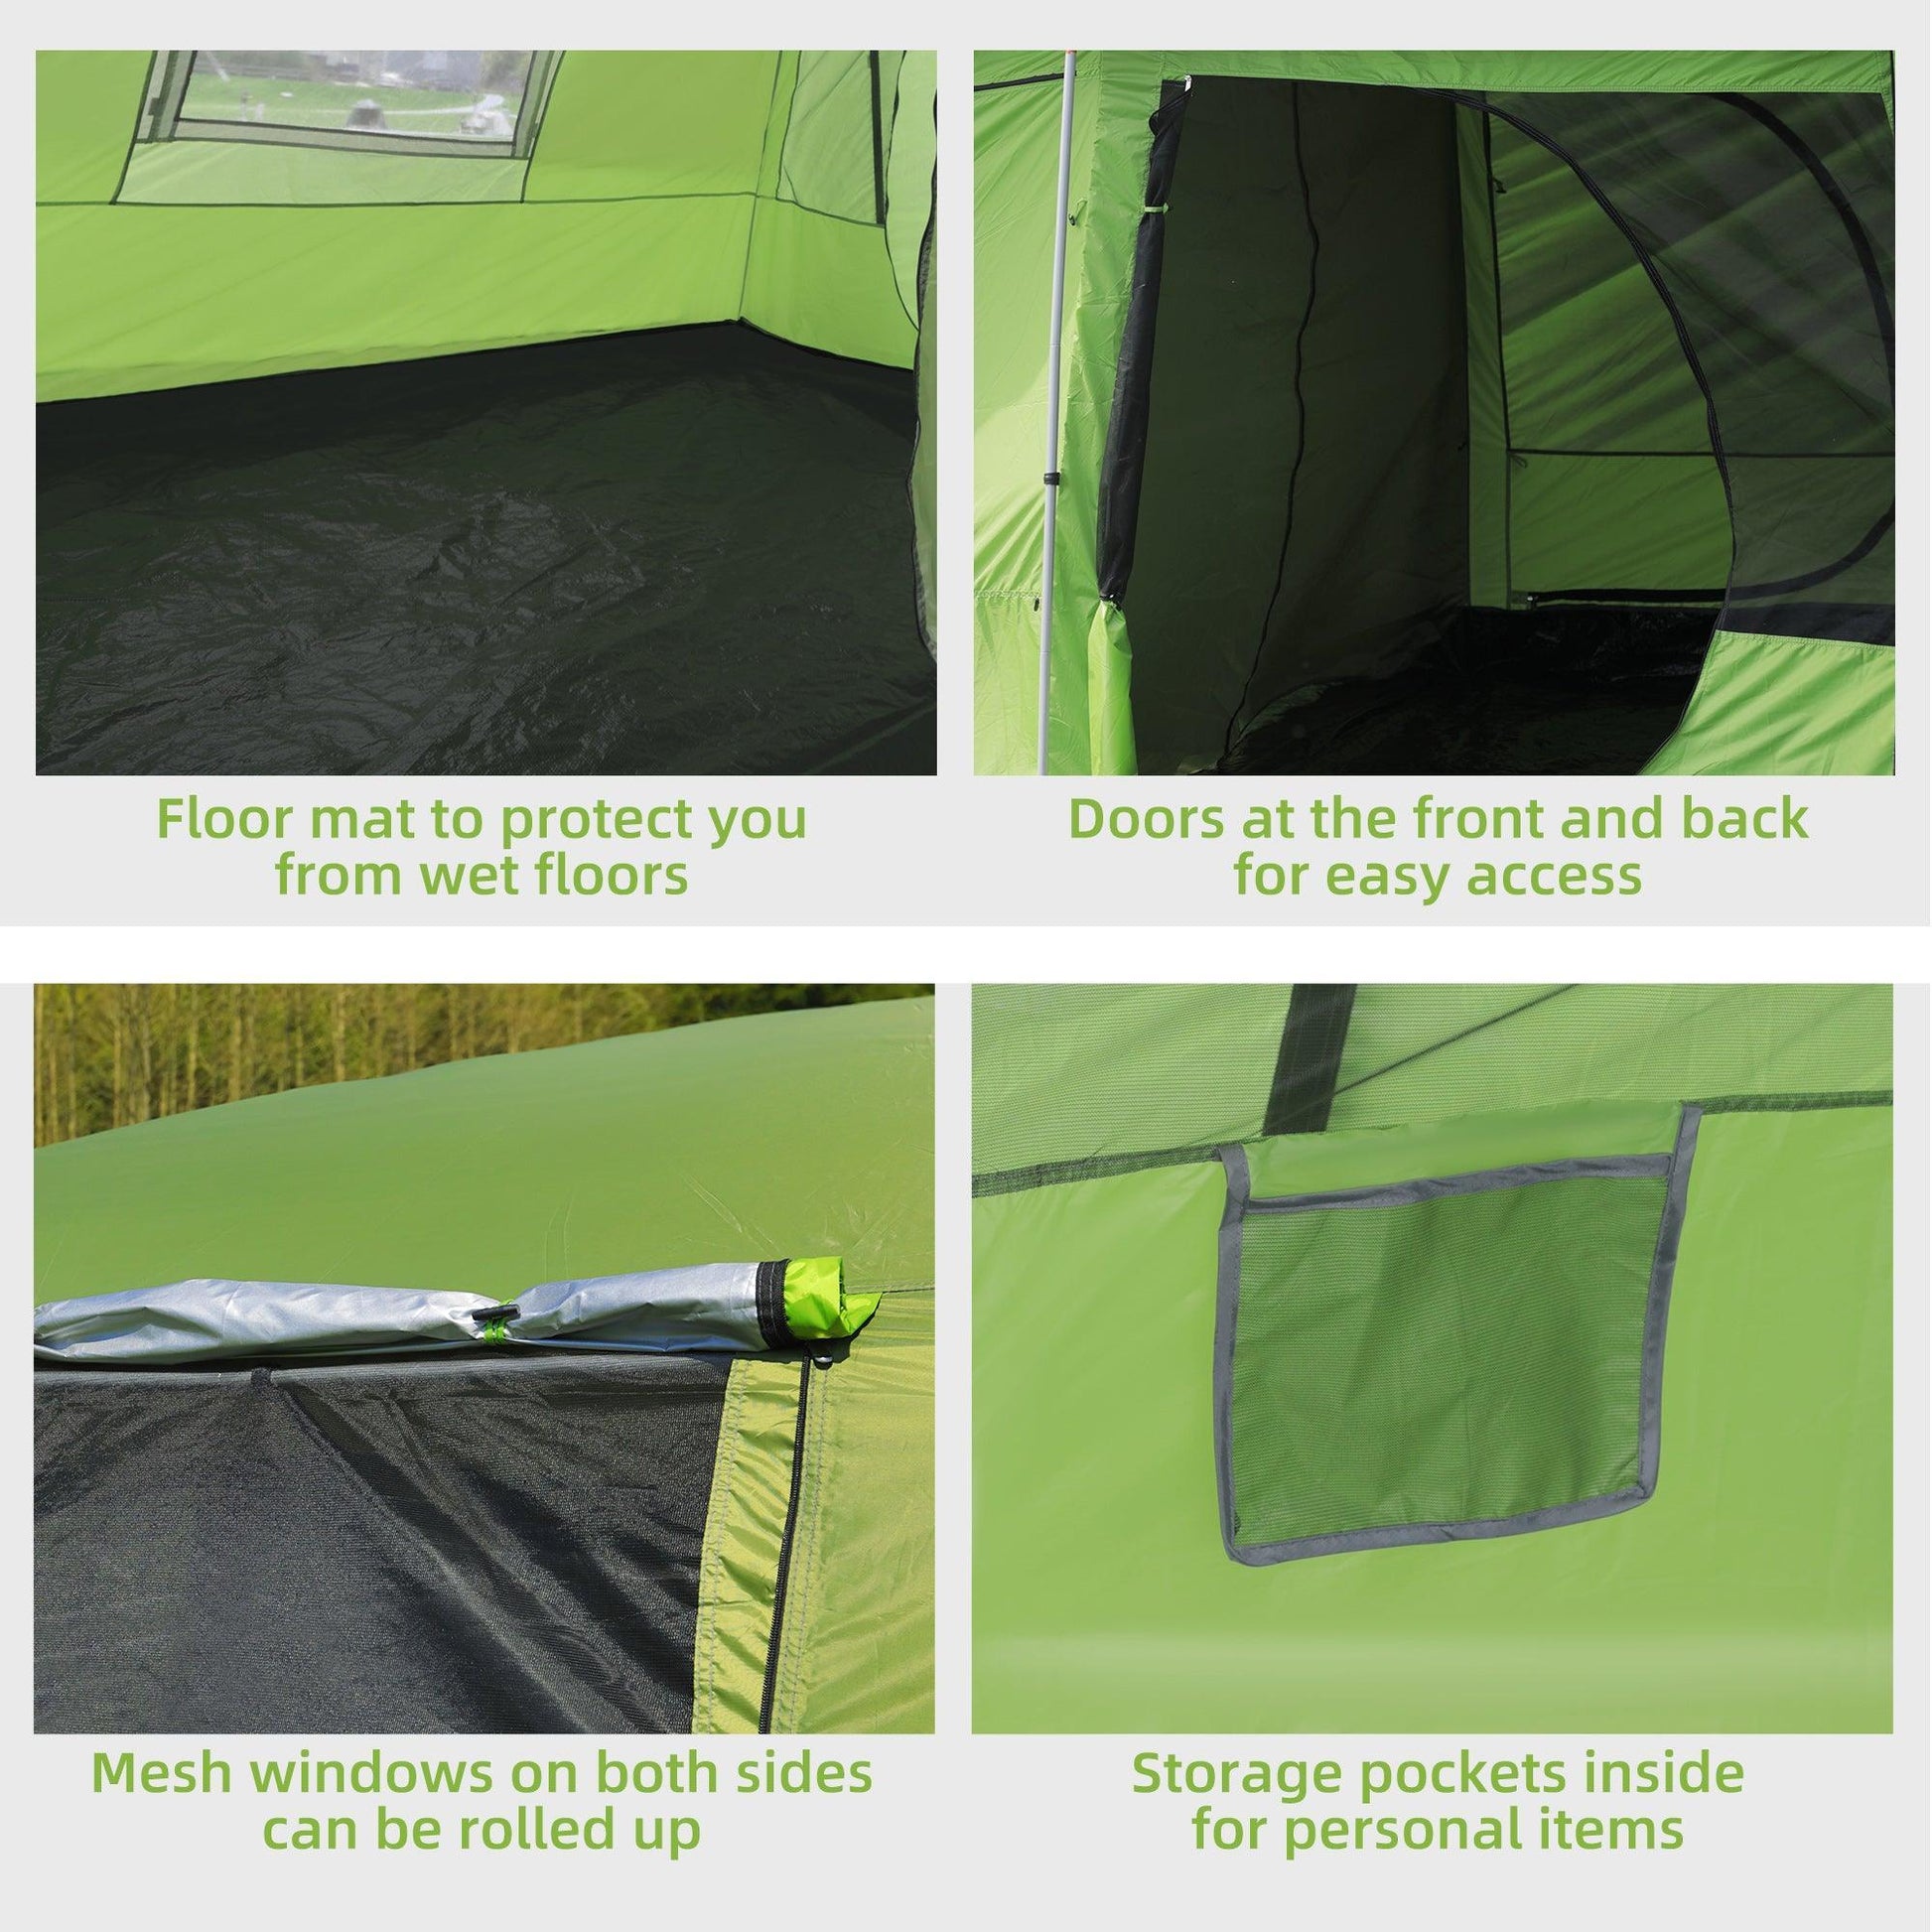 Outsunny Dome Tent: 4-8 Person Camping Shelter - ALL4U RETAILER LTD